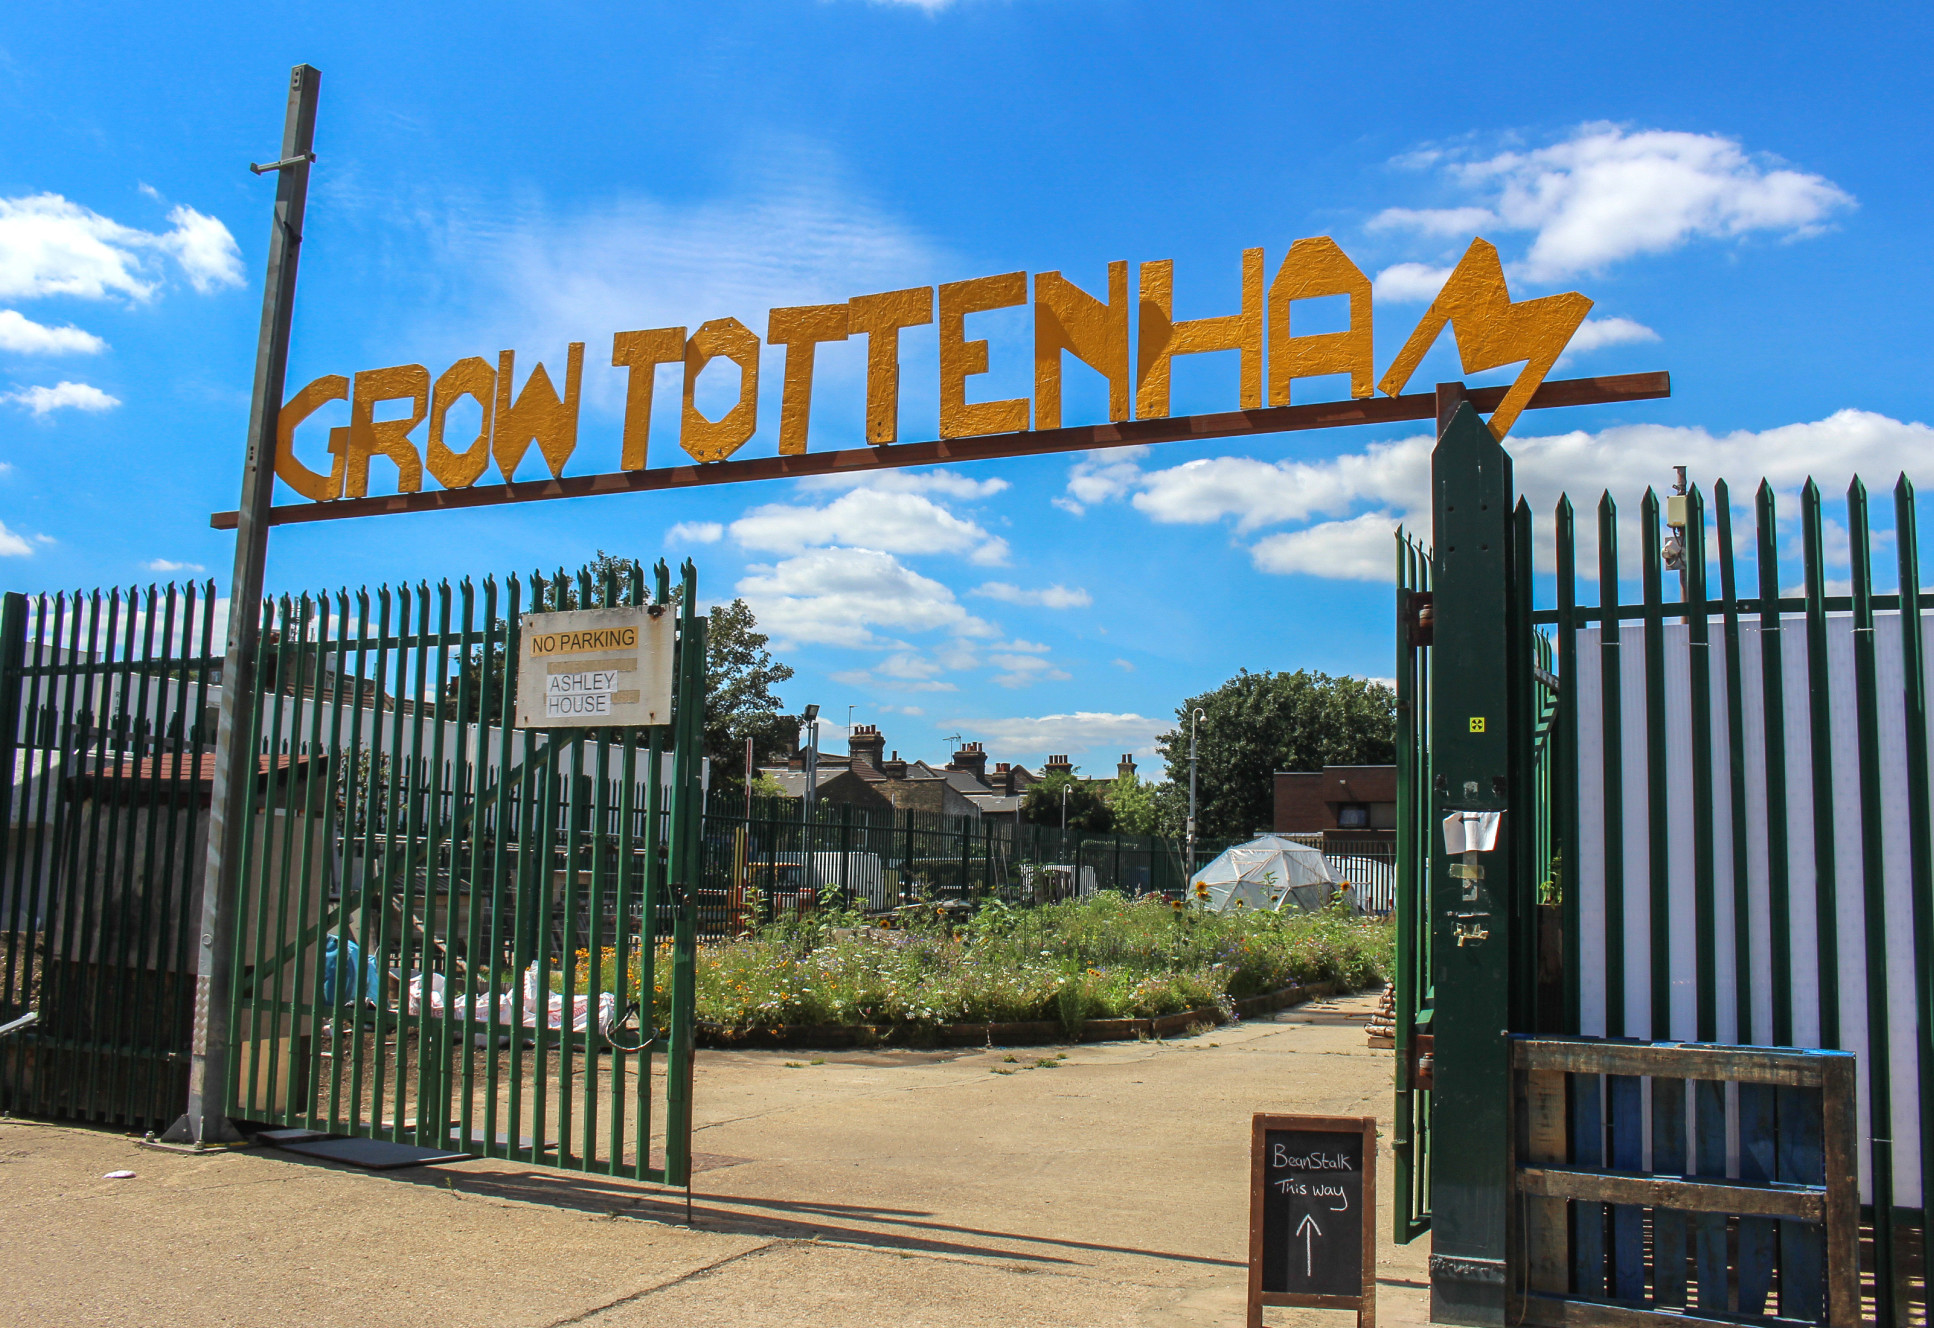 Sign over a fence that read 'Grow Tottenham'